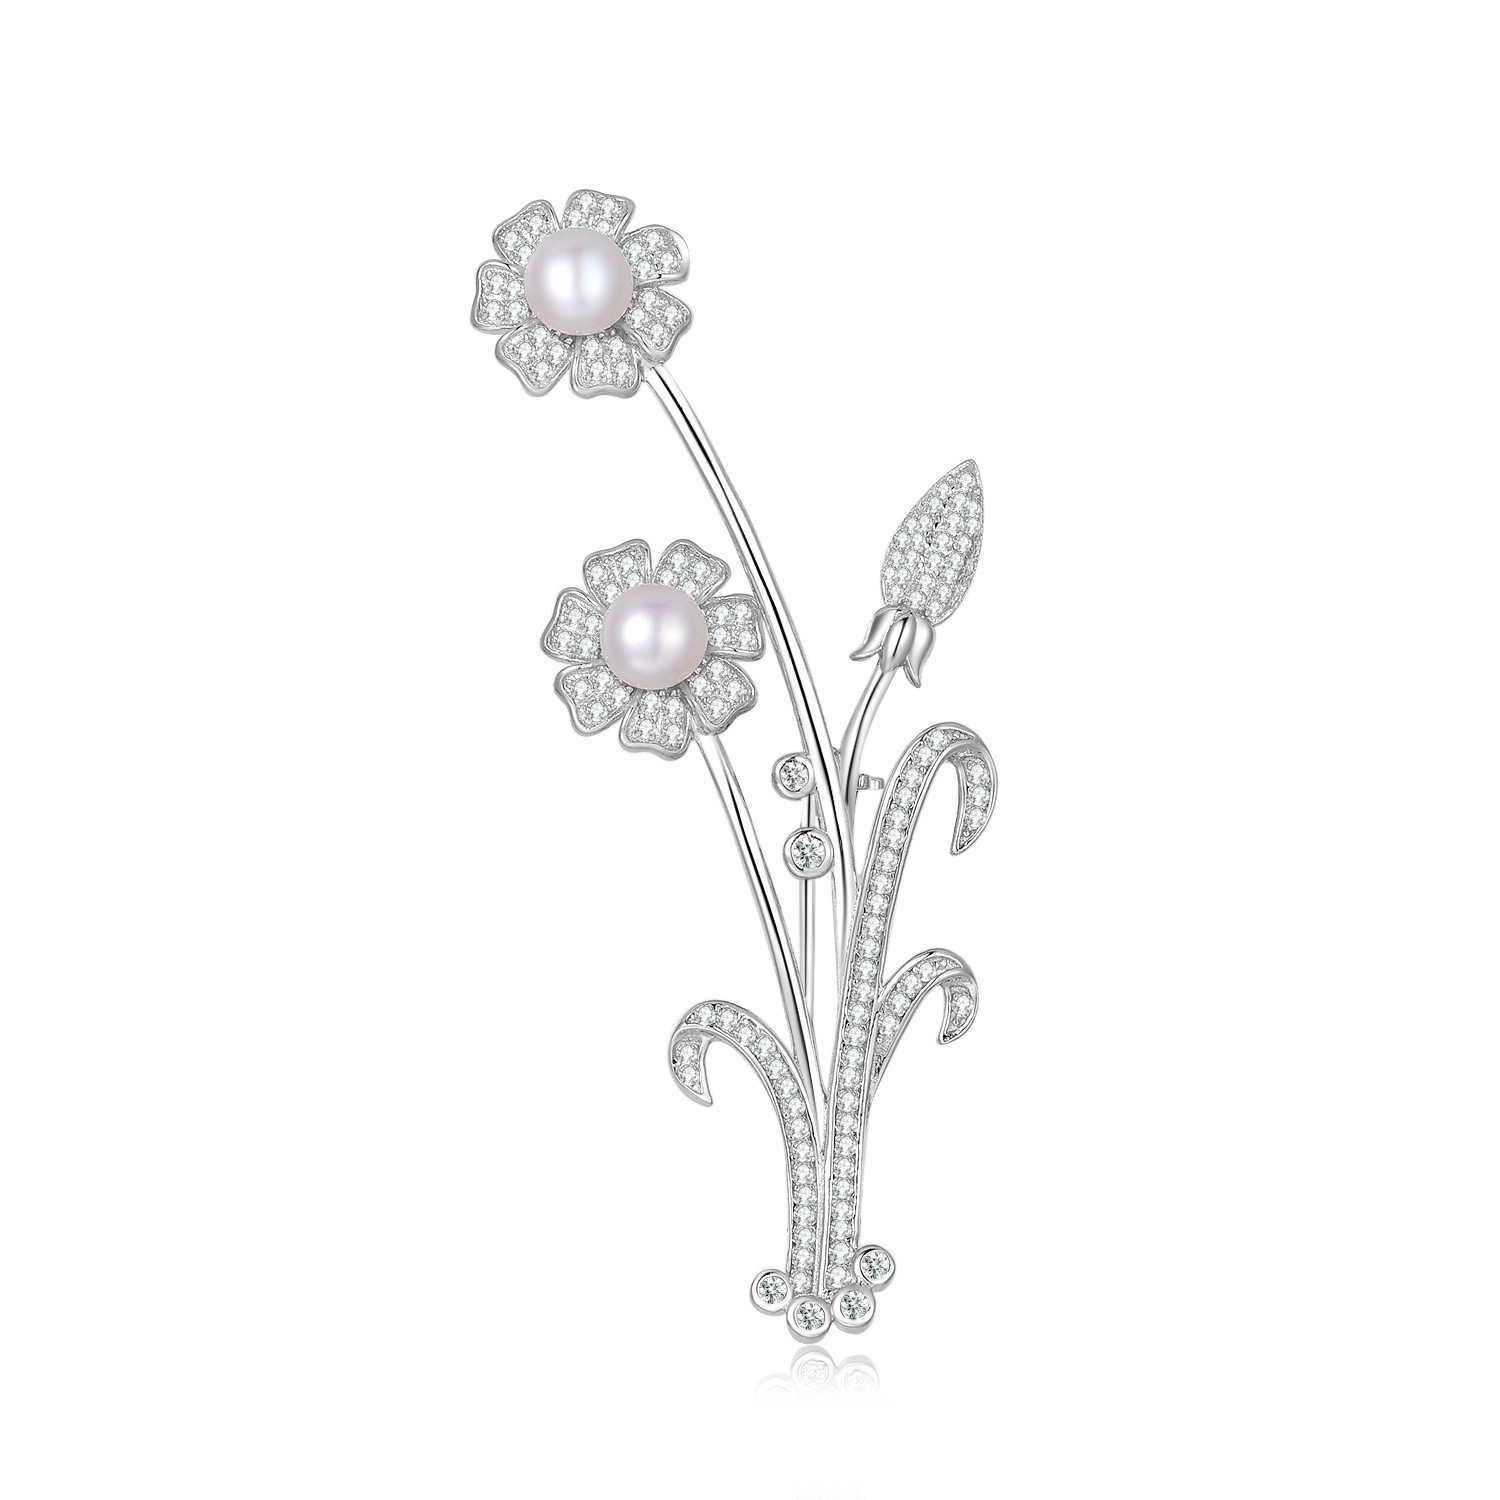 Fashion Freshwater Pearl Brooch Sterling Silver Broches Flower Leaves Brooches Women Girl